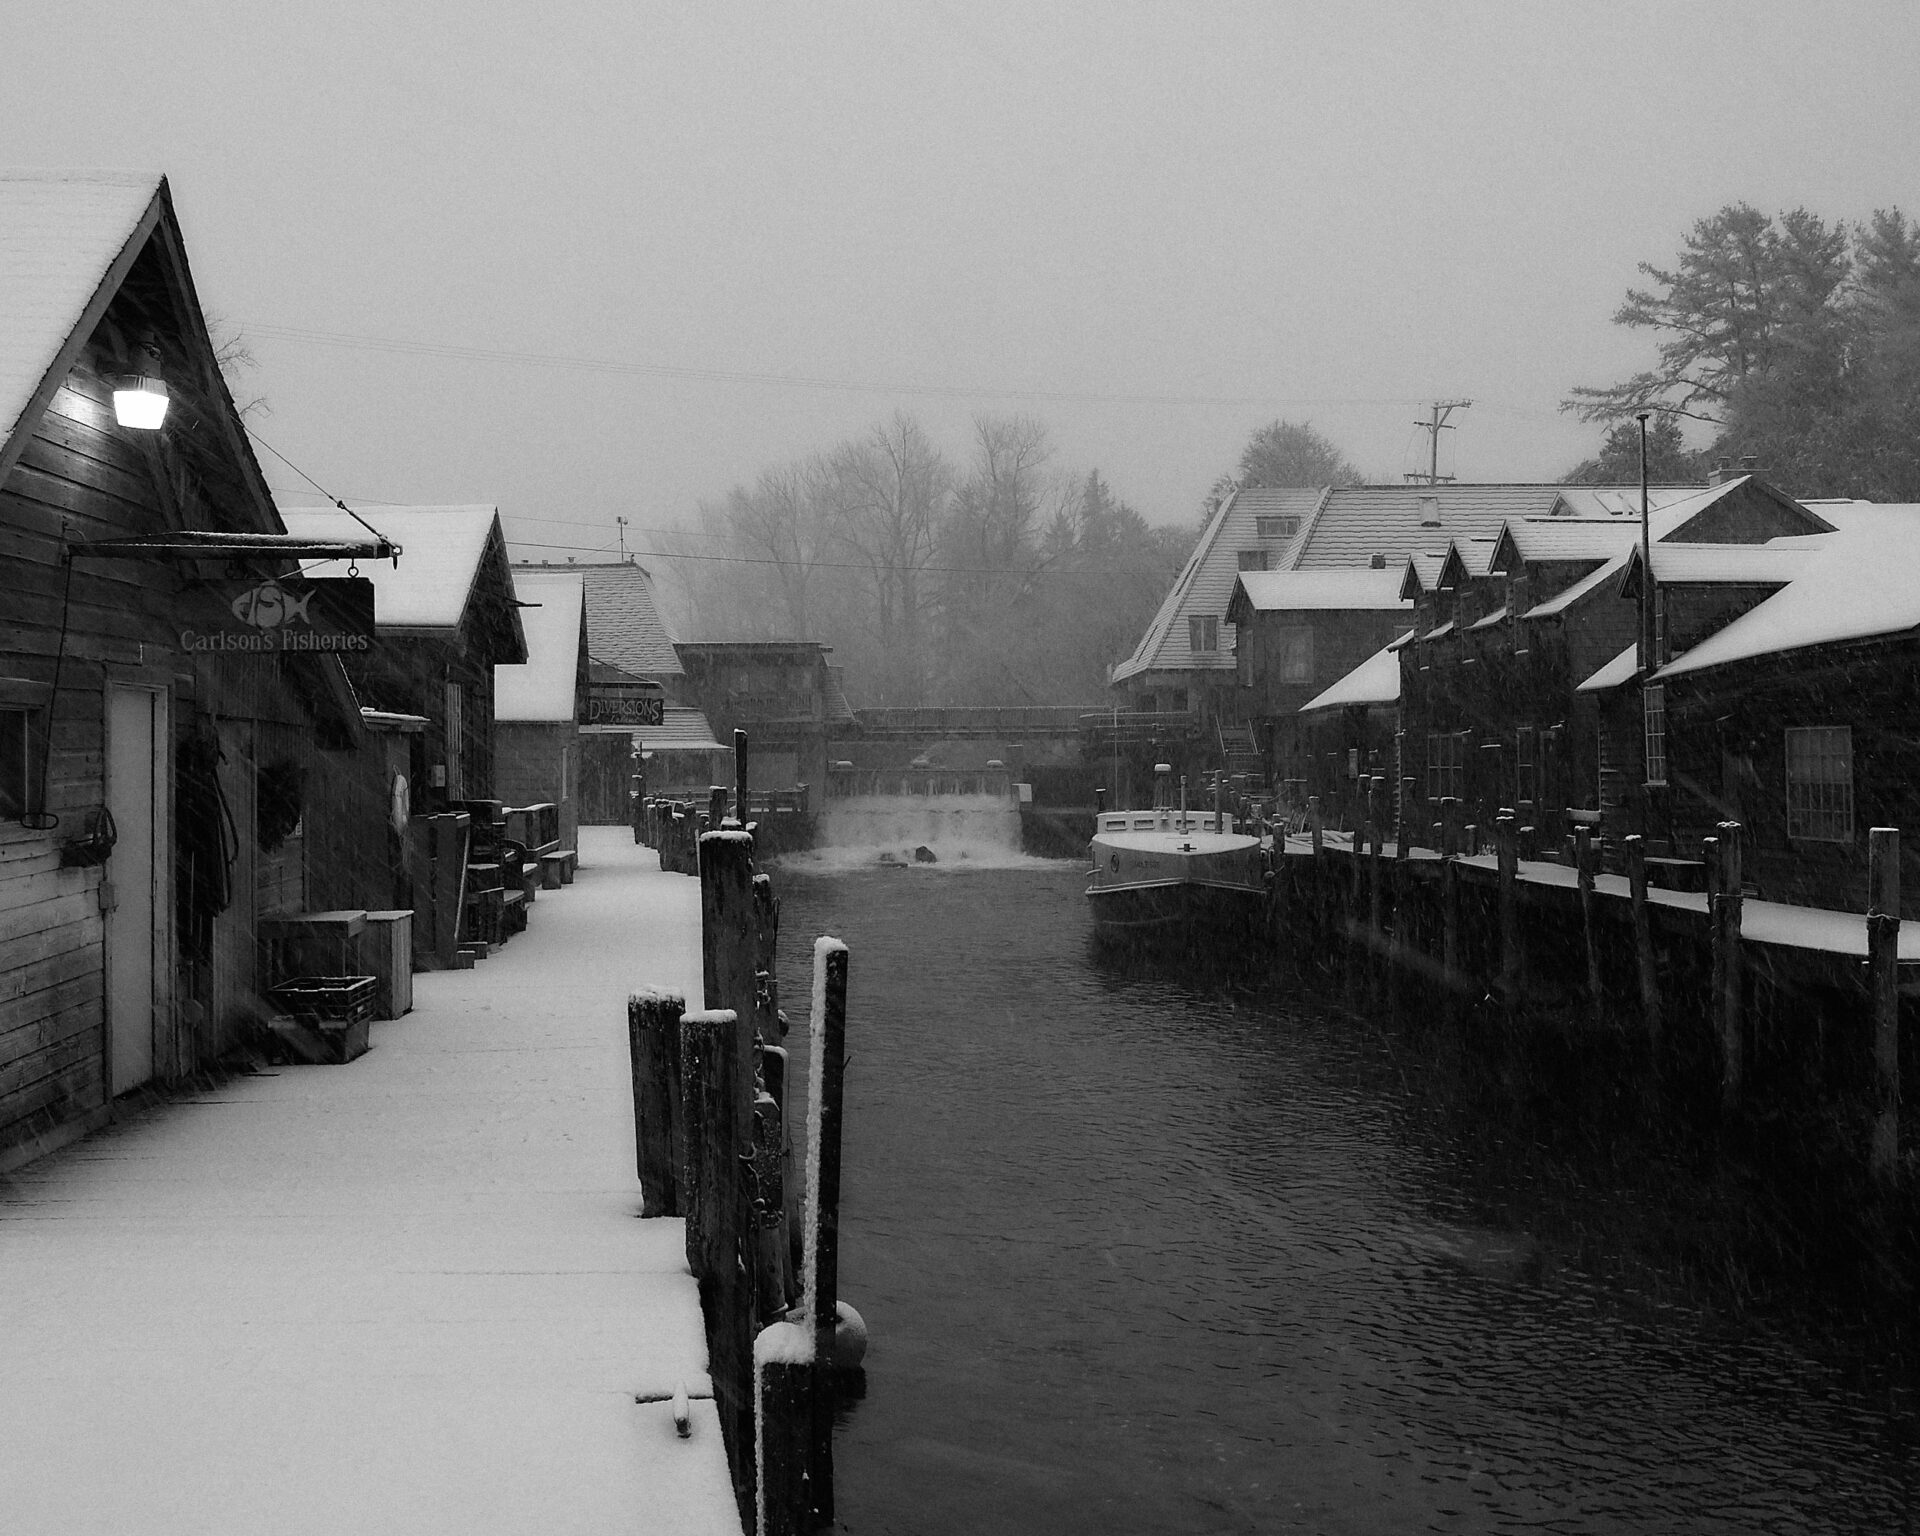 Fishtown Leland Michigan in the winter looking at the leland river dam, Carlsons fish market and the cove restaurant. light snow cover and the fishing boat Joy